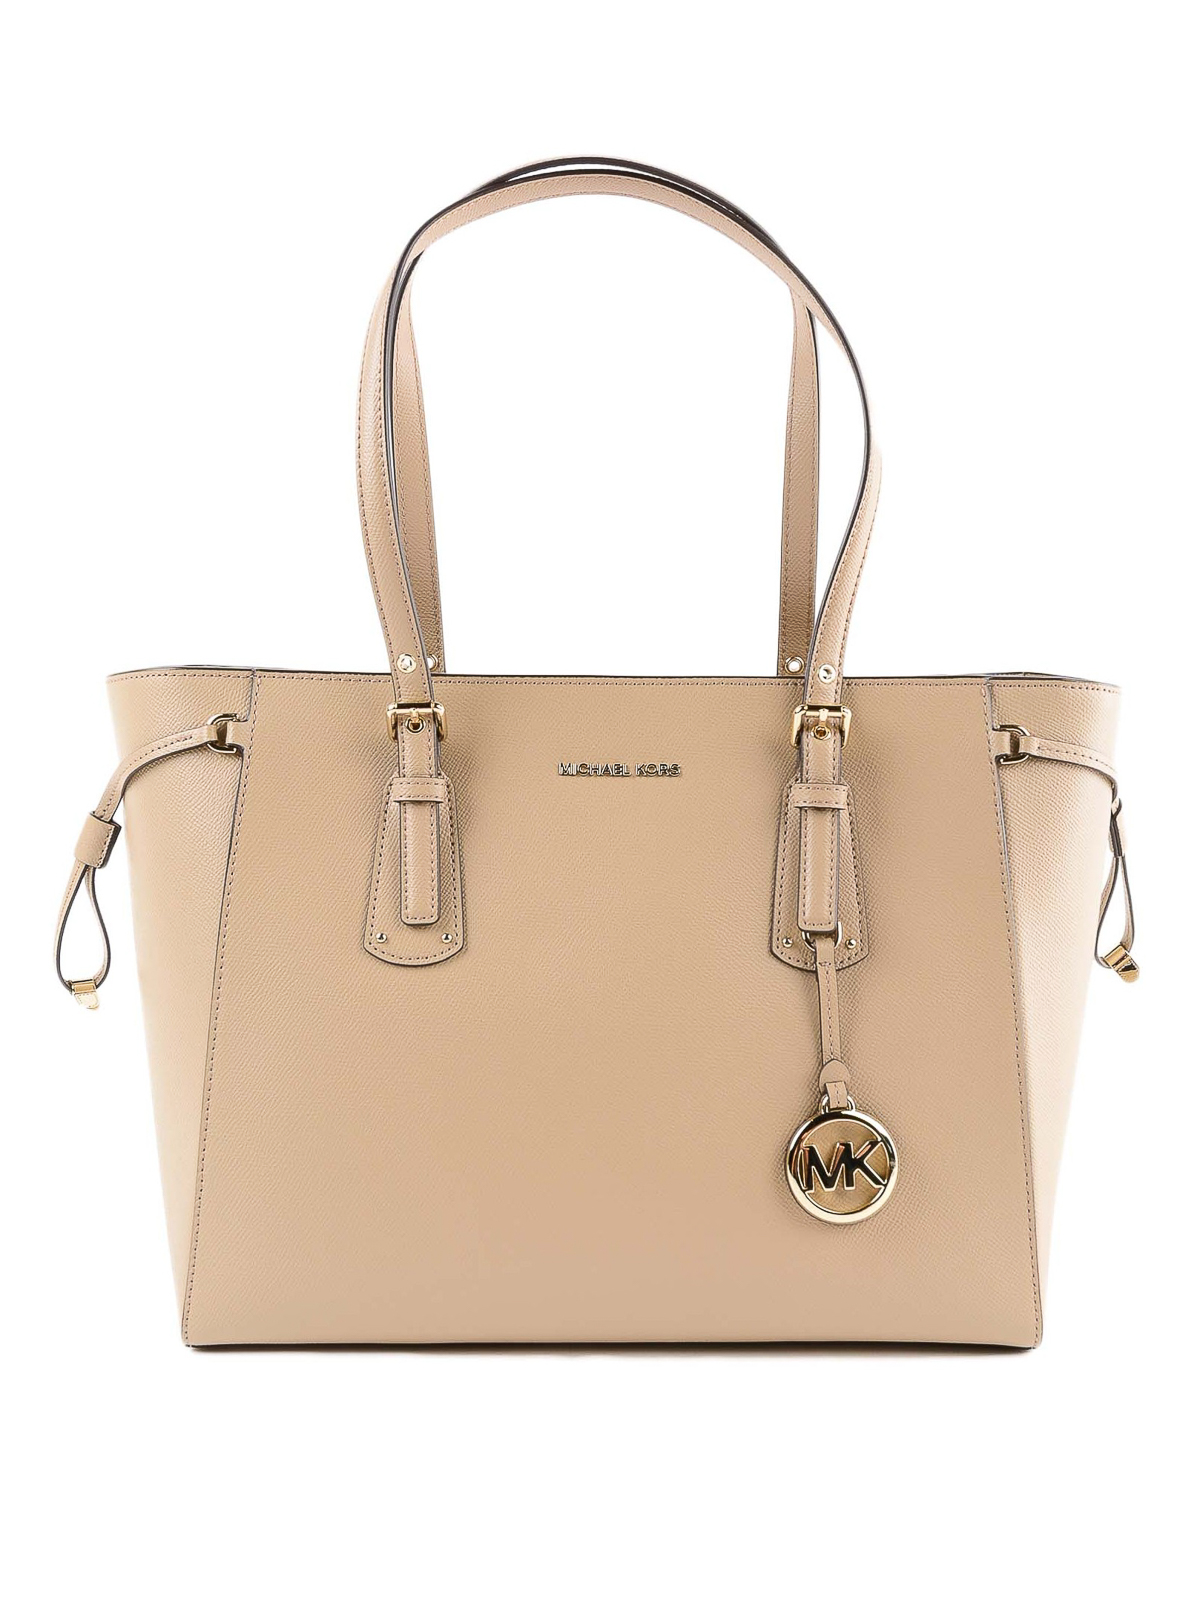 Totes bags Michael Kors - Voyager beige leather tote bag - 30F8TV6T4L208